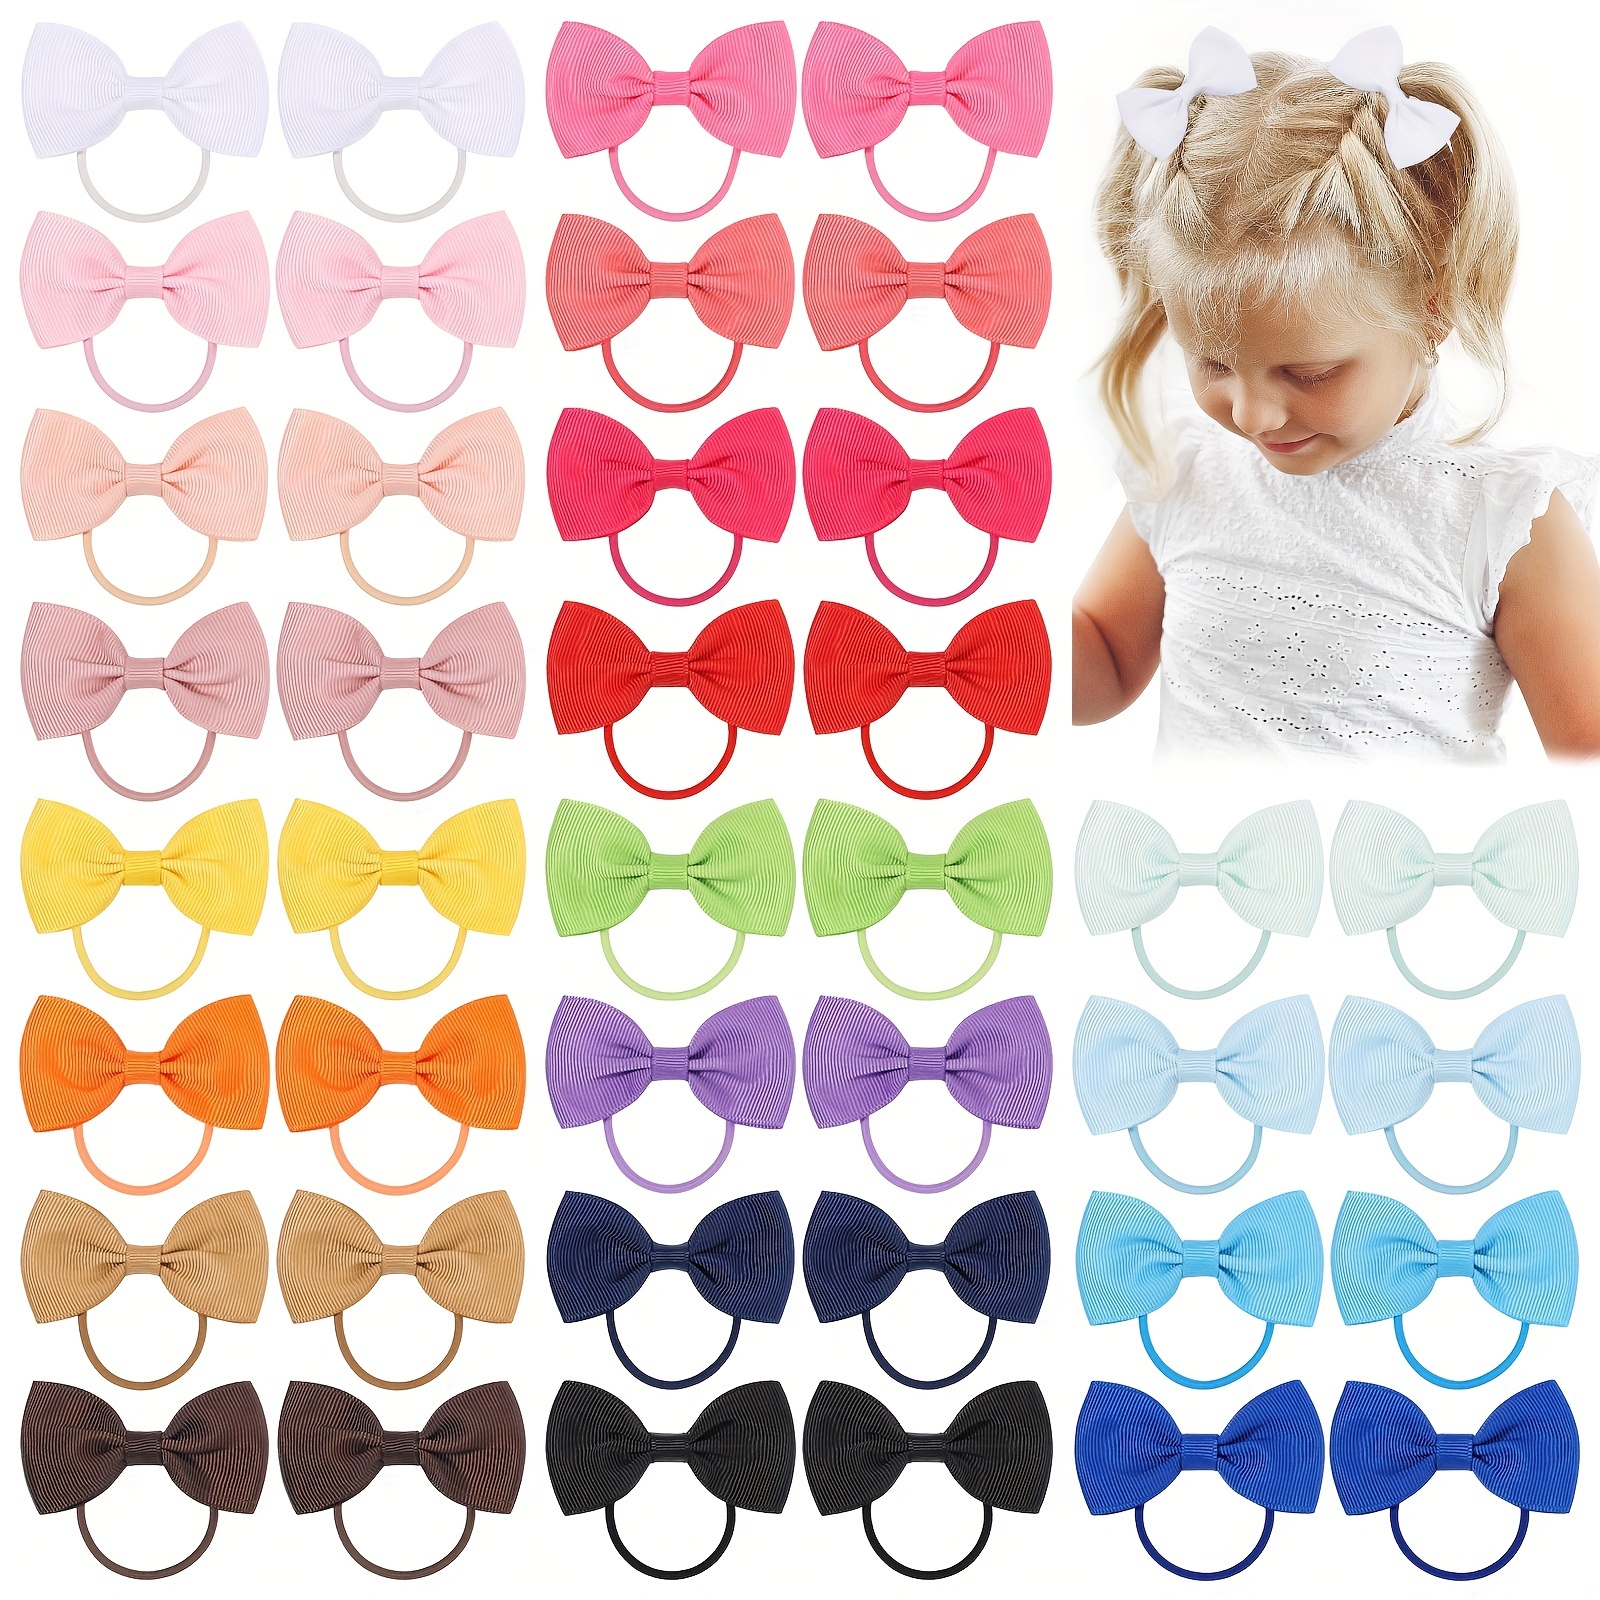 

20pcs/set Toddler Girls Candy-colored Children's Bowknot Hair Rope Solid-colored Rubber Band Hair Wear Accessories For Children, Ideal Choice For Gifts